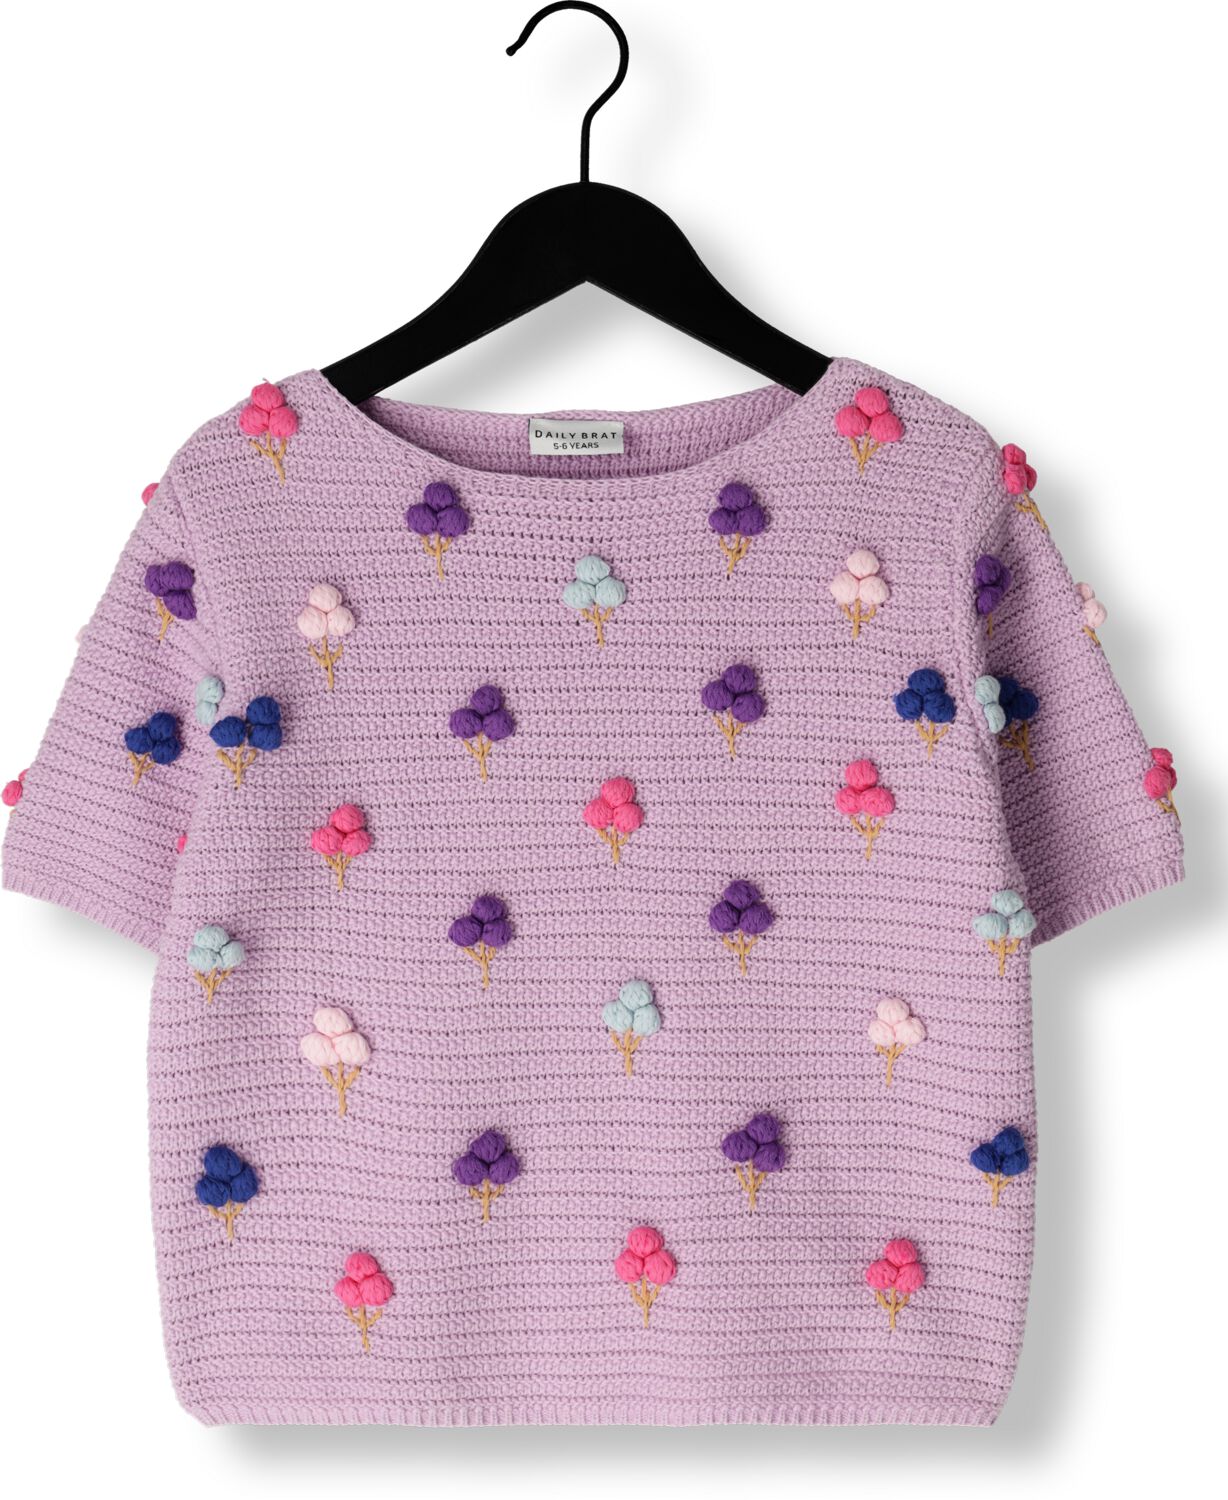 DAILY BRAT Meisjes Tops & T-shirts Ice Knitted T-shirt Paars